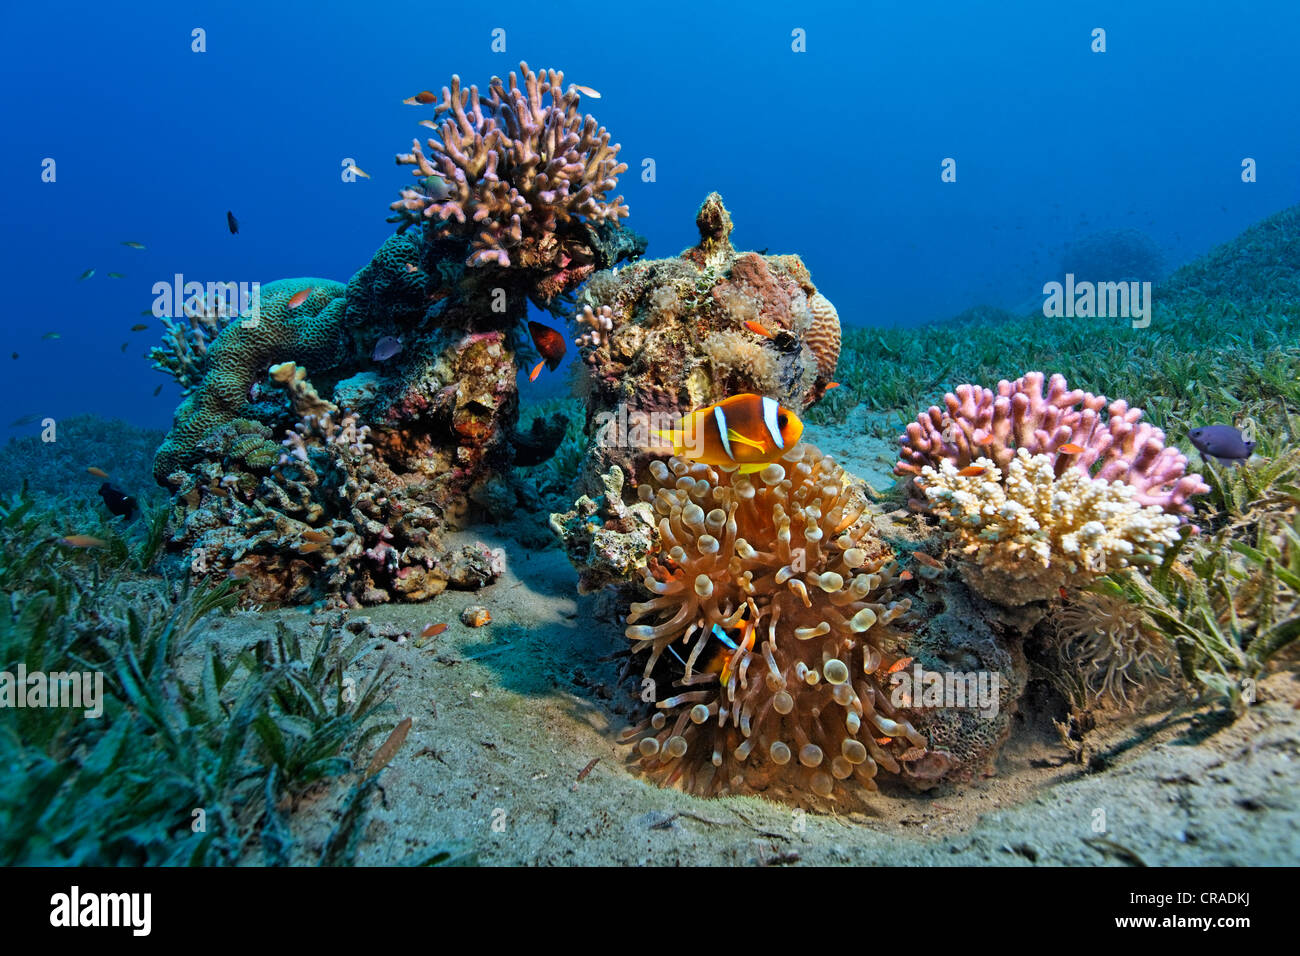 Small patchreef on sea weed with stone corals, sea anemone, Red Sea Anemonefish (Amphiprion bicinctus) Stock Photo